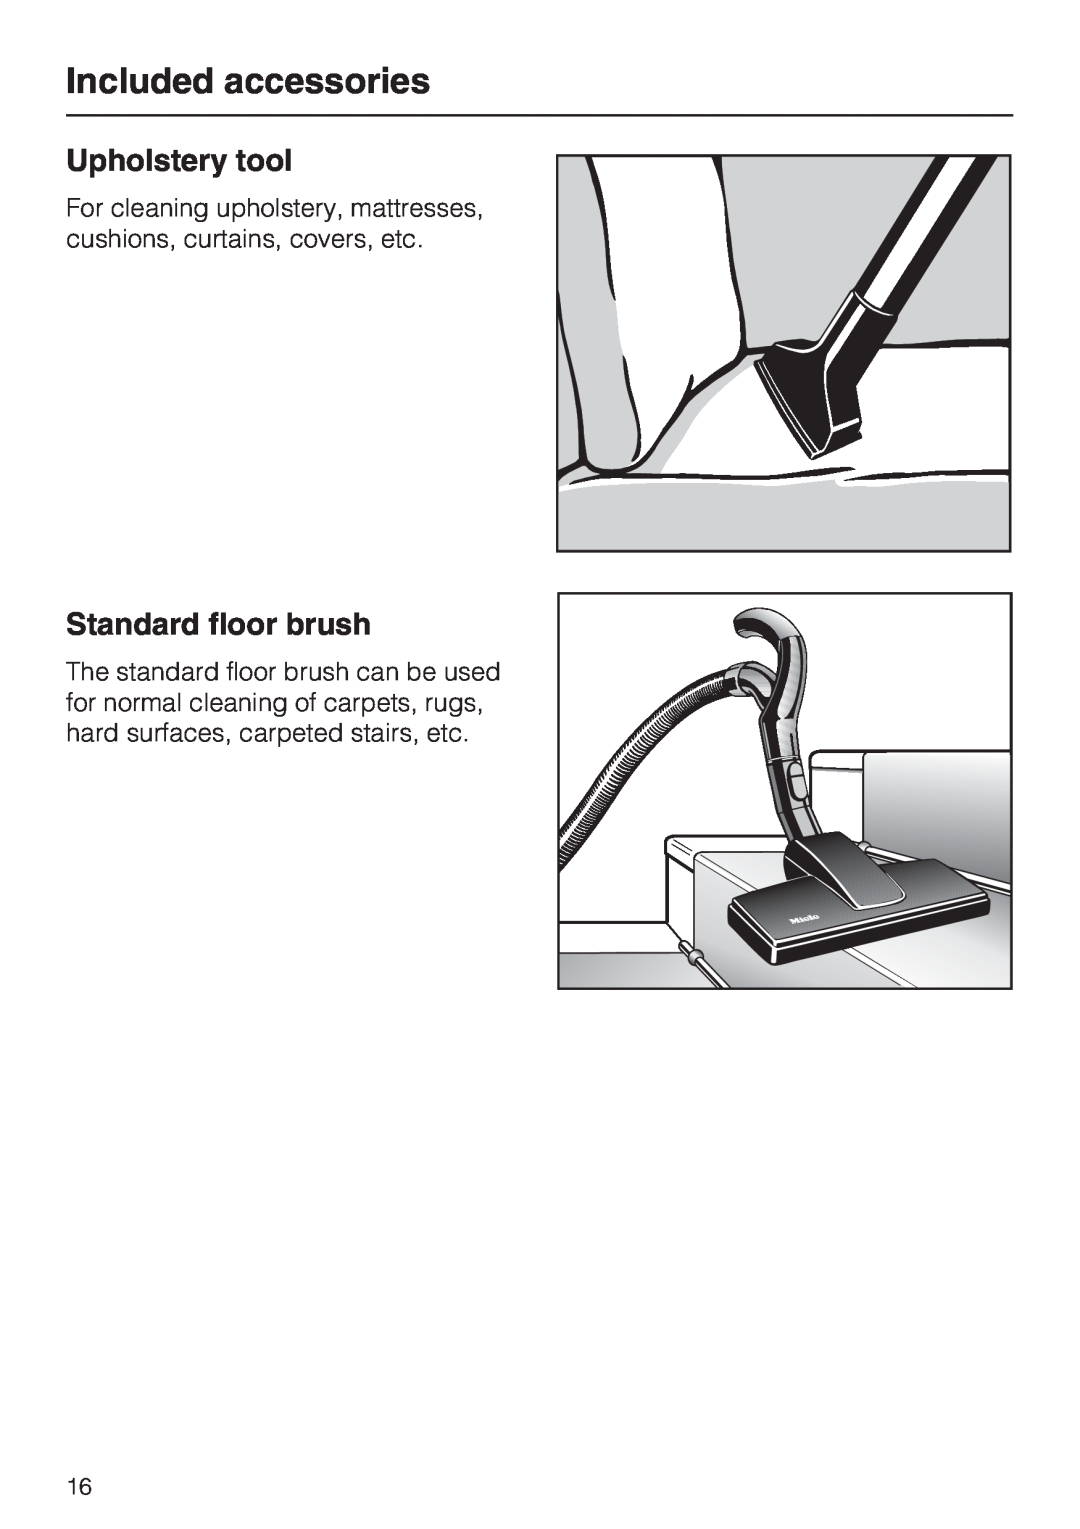 Miele S 5980 operating instructions Upholstery tool, Standard floor brush, Included accessories 